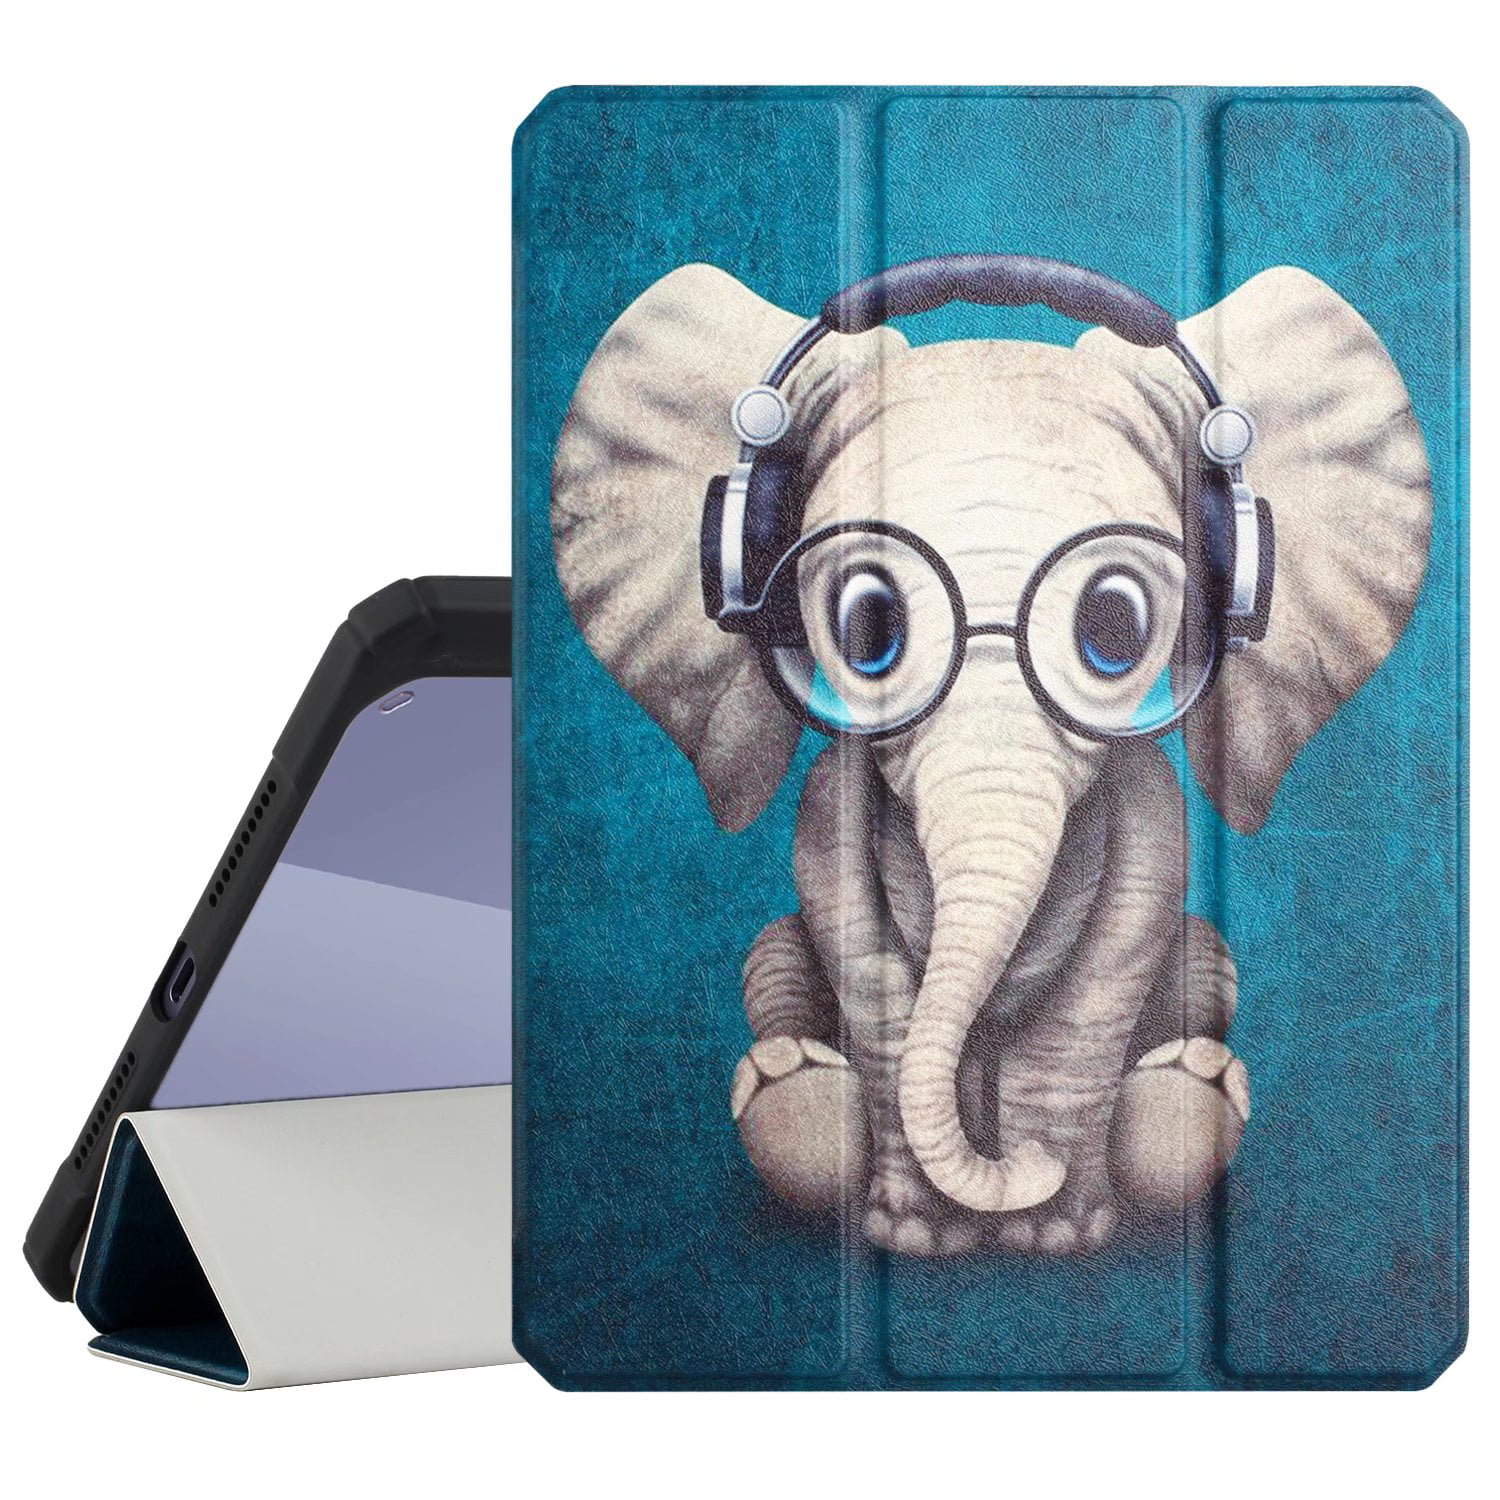 kranium Bitterhed Vred MonsDirect Case for iPad Mini 6 2021, Built-in Pencil Holder Standing Cover  with Clear Transparent Back Shell, Tri-fold Smart Auto Wake/Sleep Case for  iPad Mini 6th Generation 8.3 inch, Elephant - Walmart.com